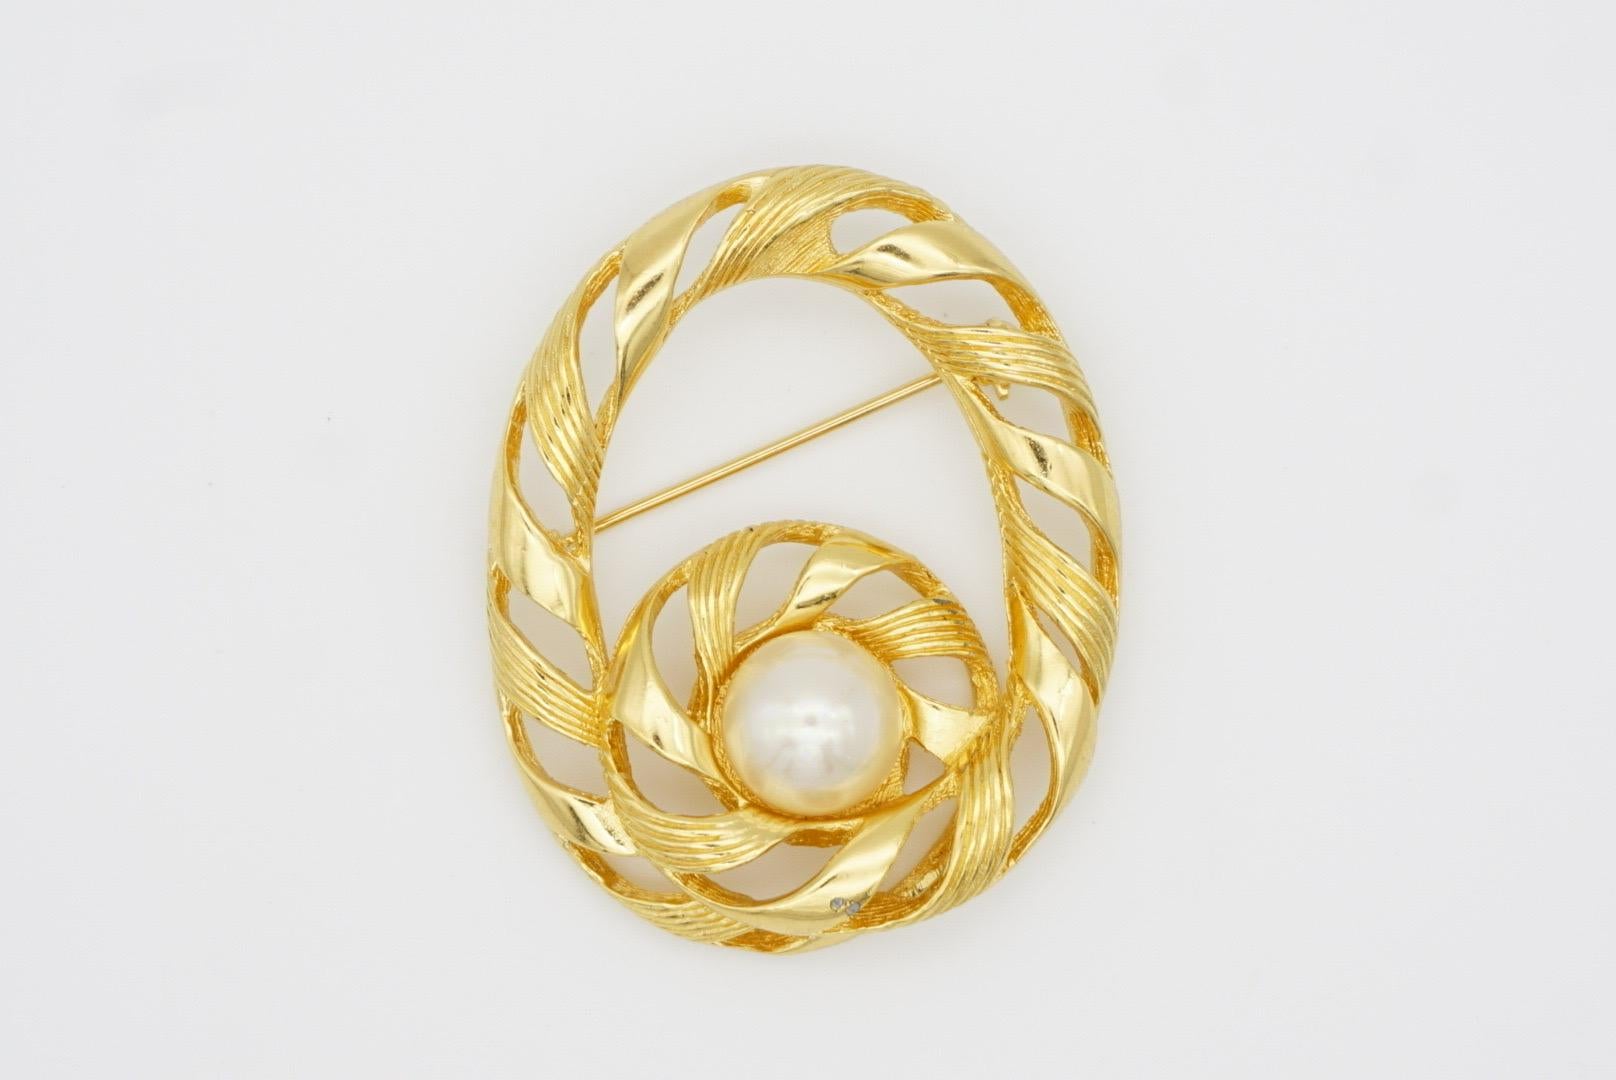 Christian Dior 1970s Vintage Large Openwork Round Swirl Knot White Pearl Brooch For Sale 7